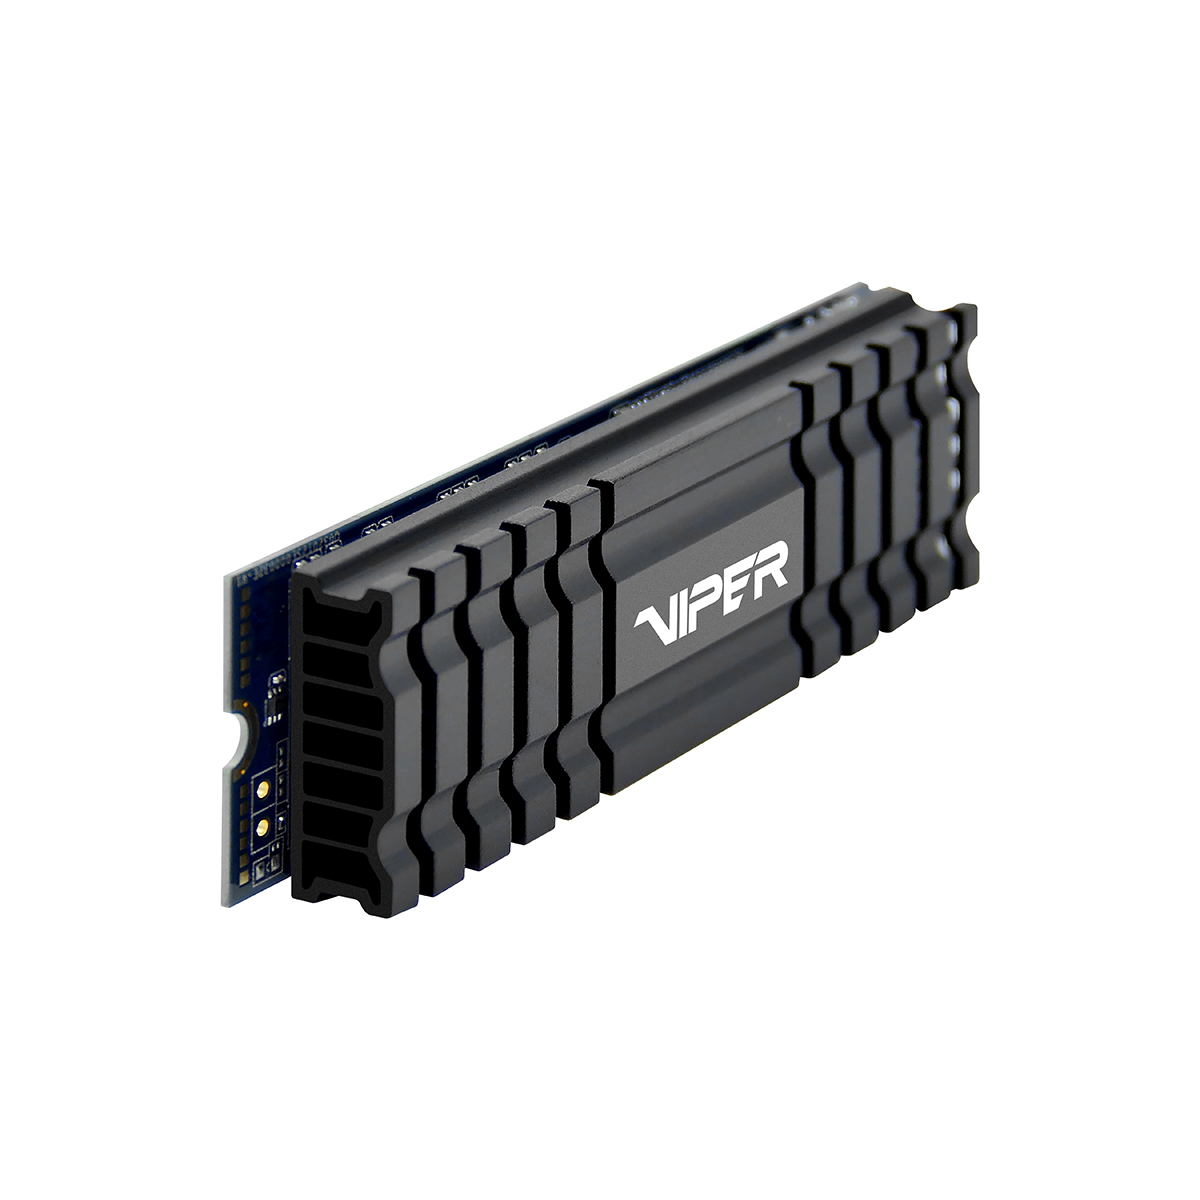 VIPER GAMING launches Viper VPN100 PCIe M.2 SSD for the extreme gameplay experience